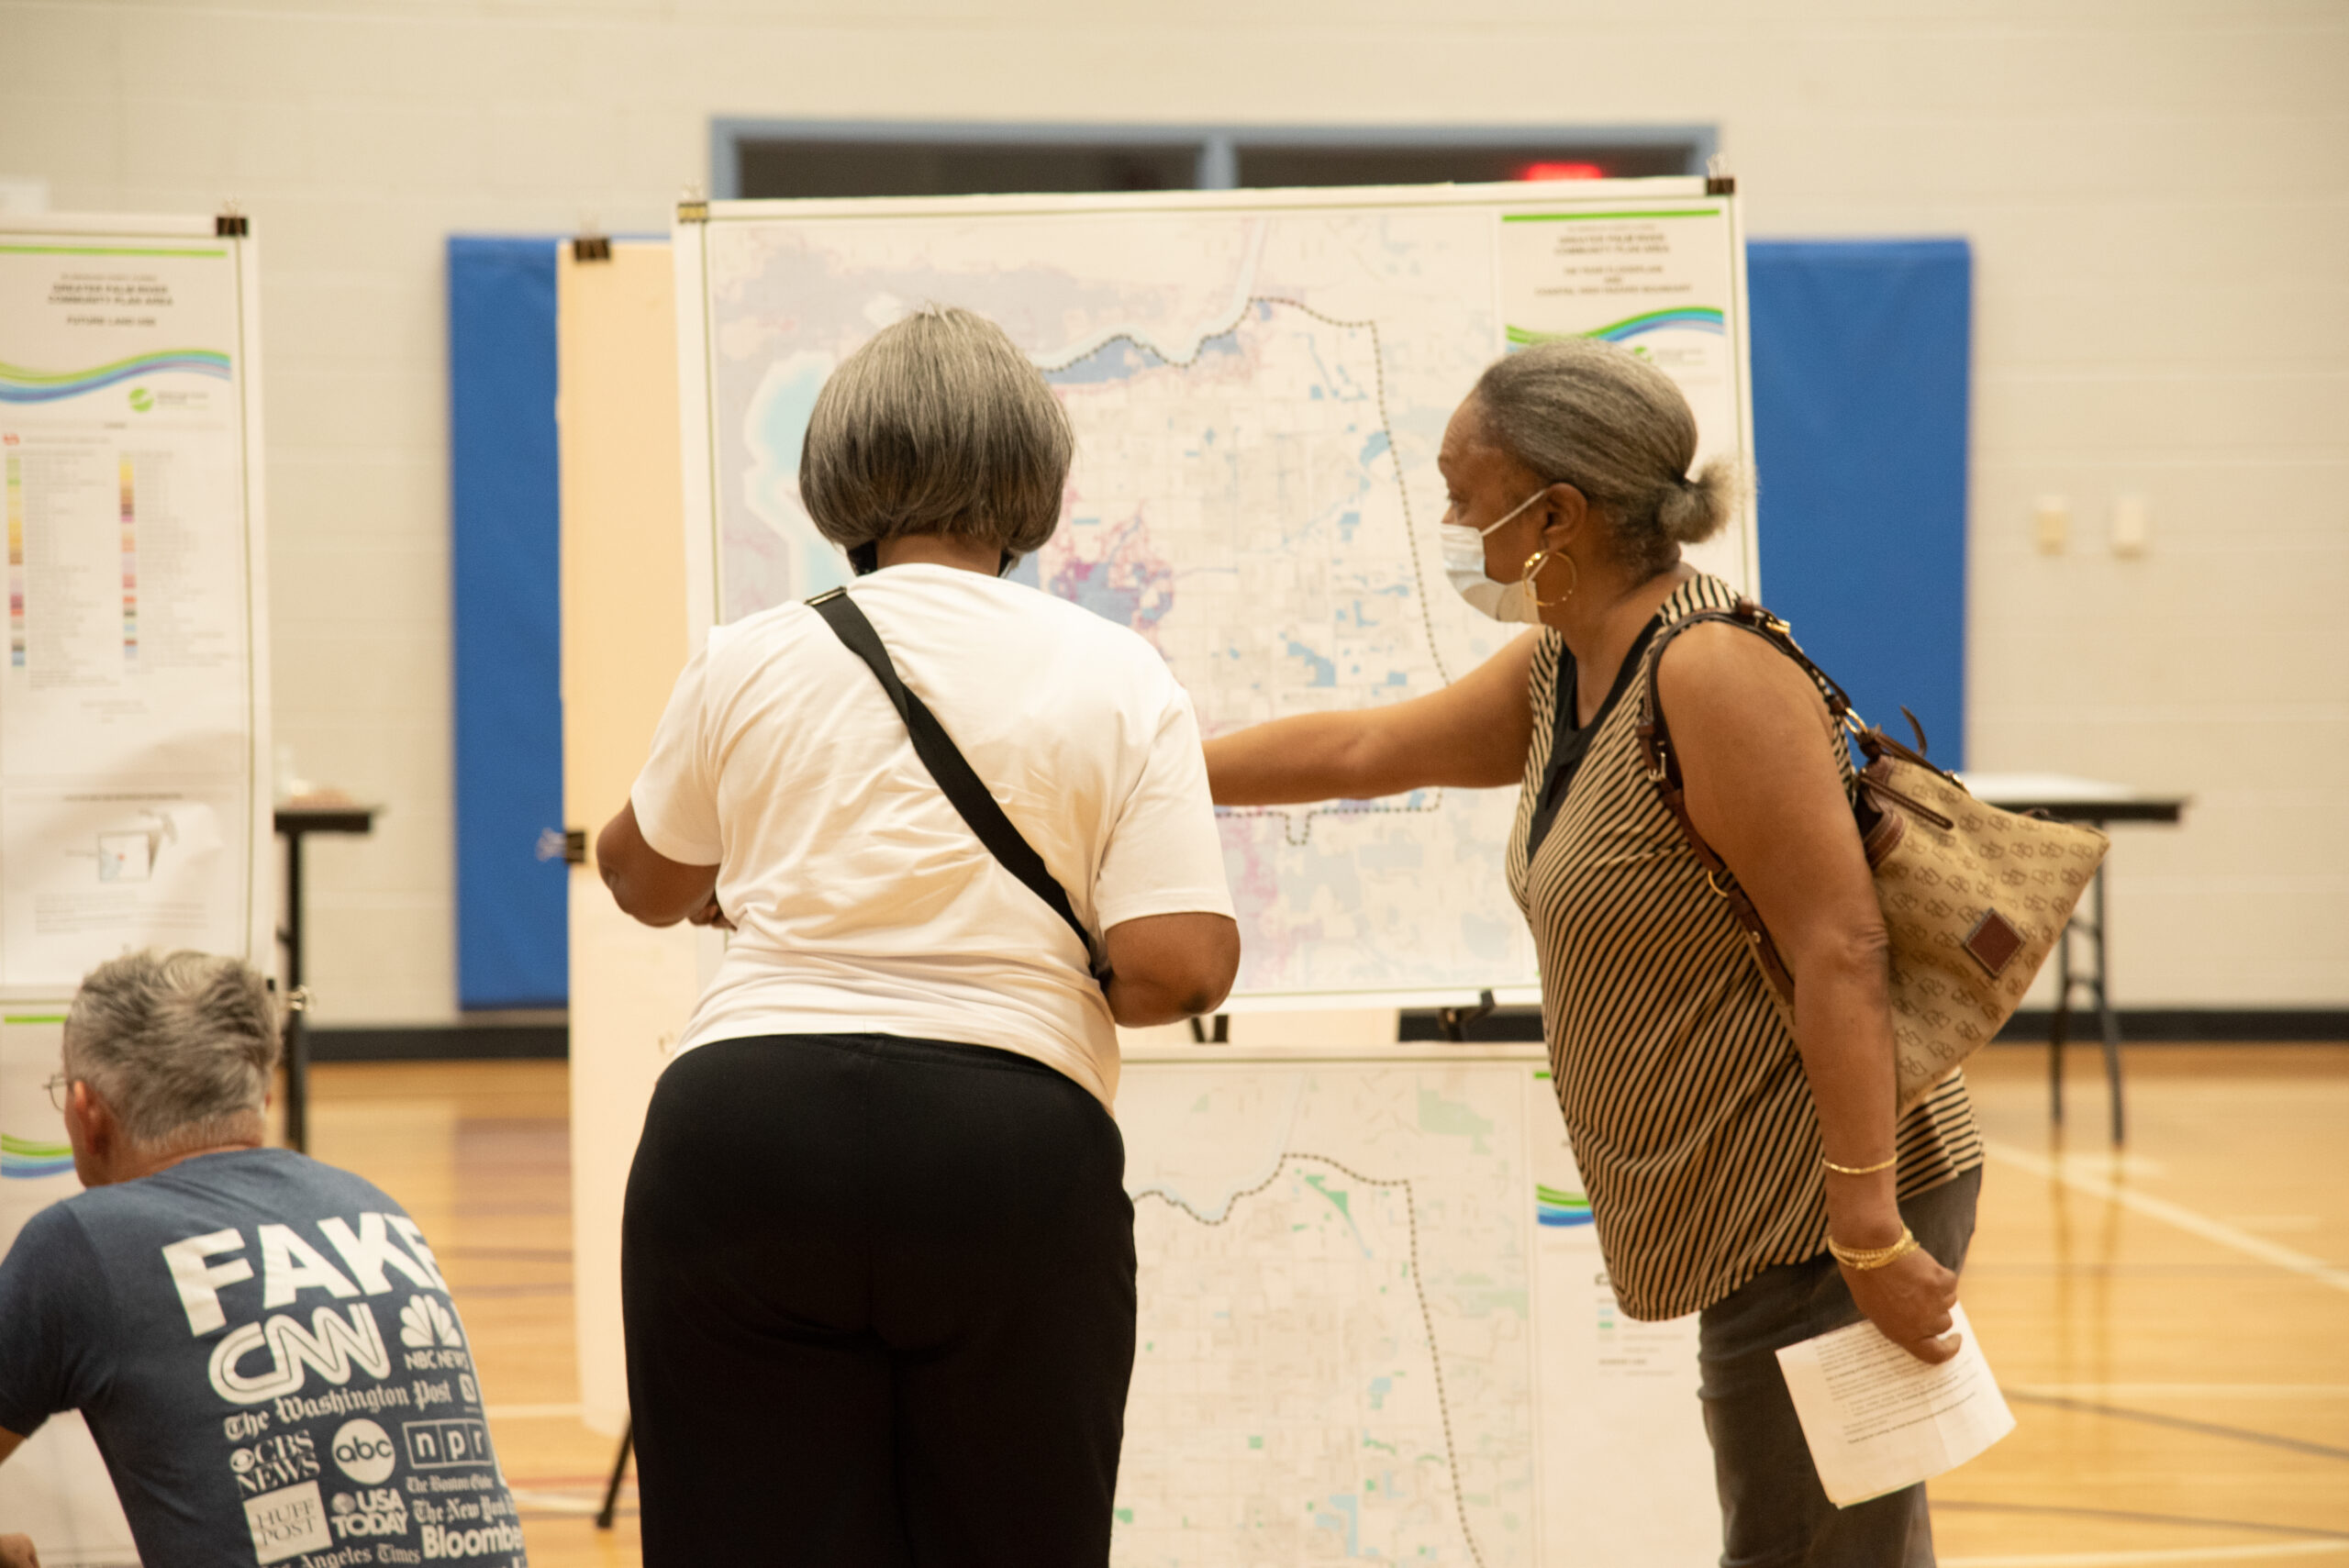 Greater Palm River Area Community Plan Update Open House (November 15, 2022)